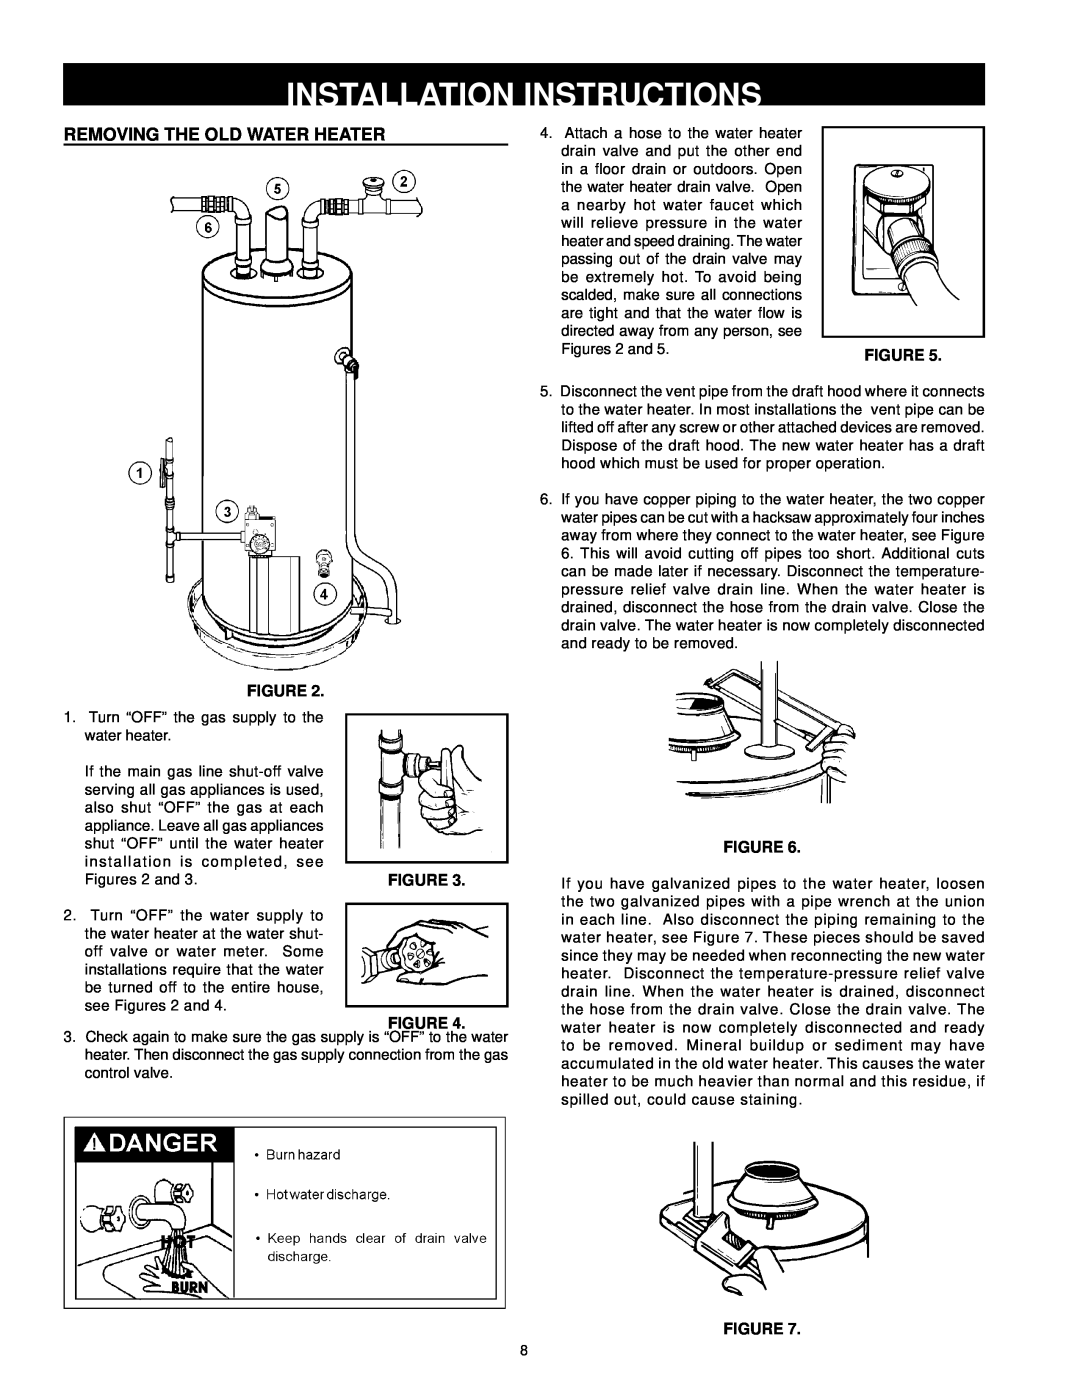 Kenmore 153.33385 owner manual Installation Instructions, Removing The Old Water Heater, Figure 